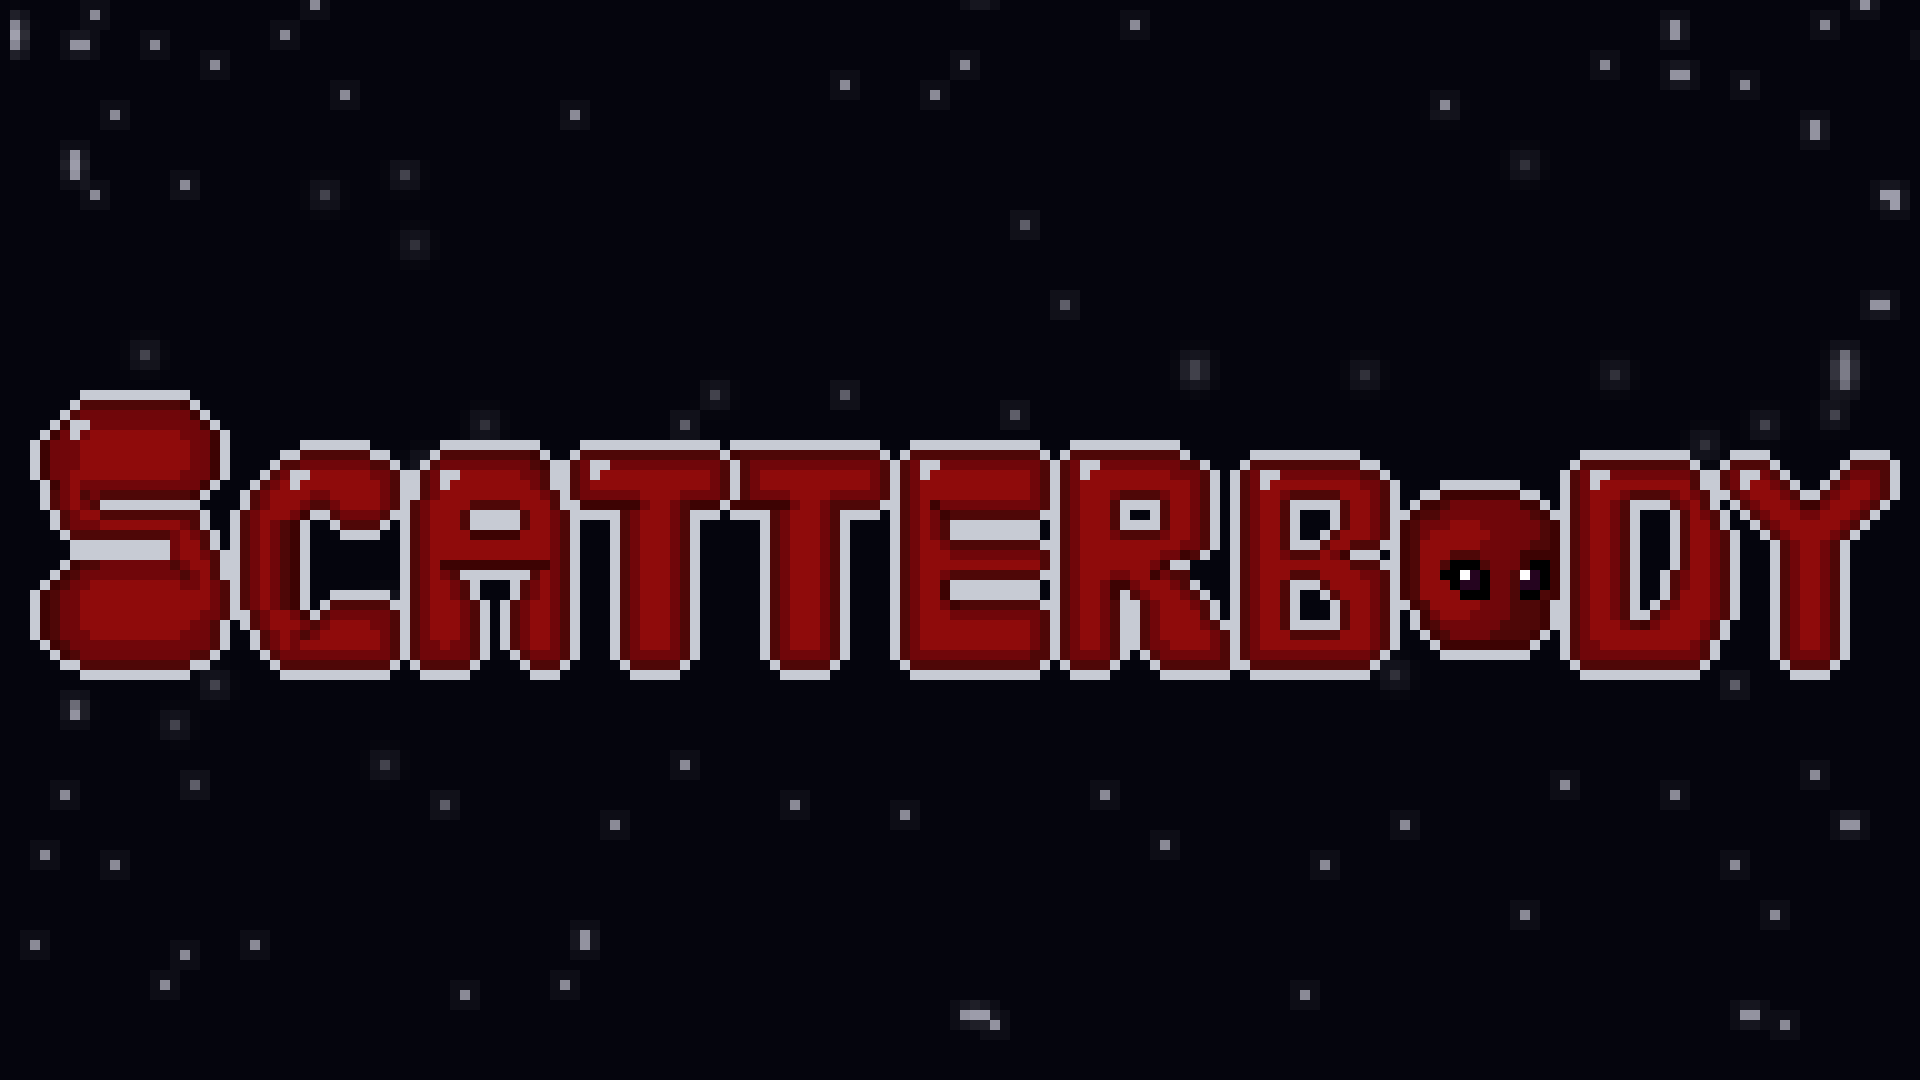 Scatterbody